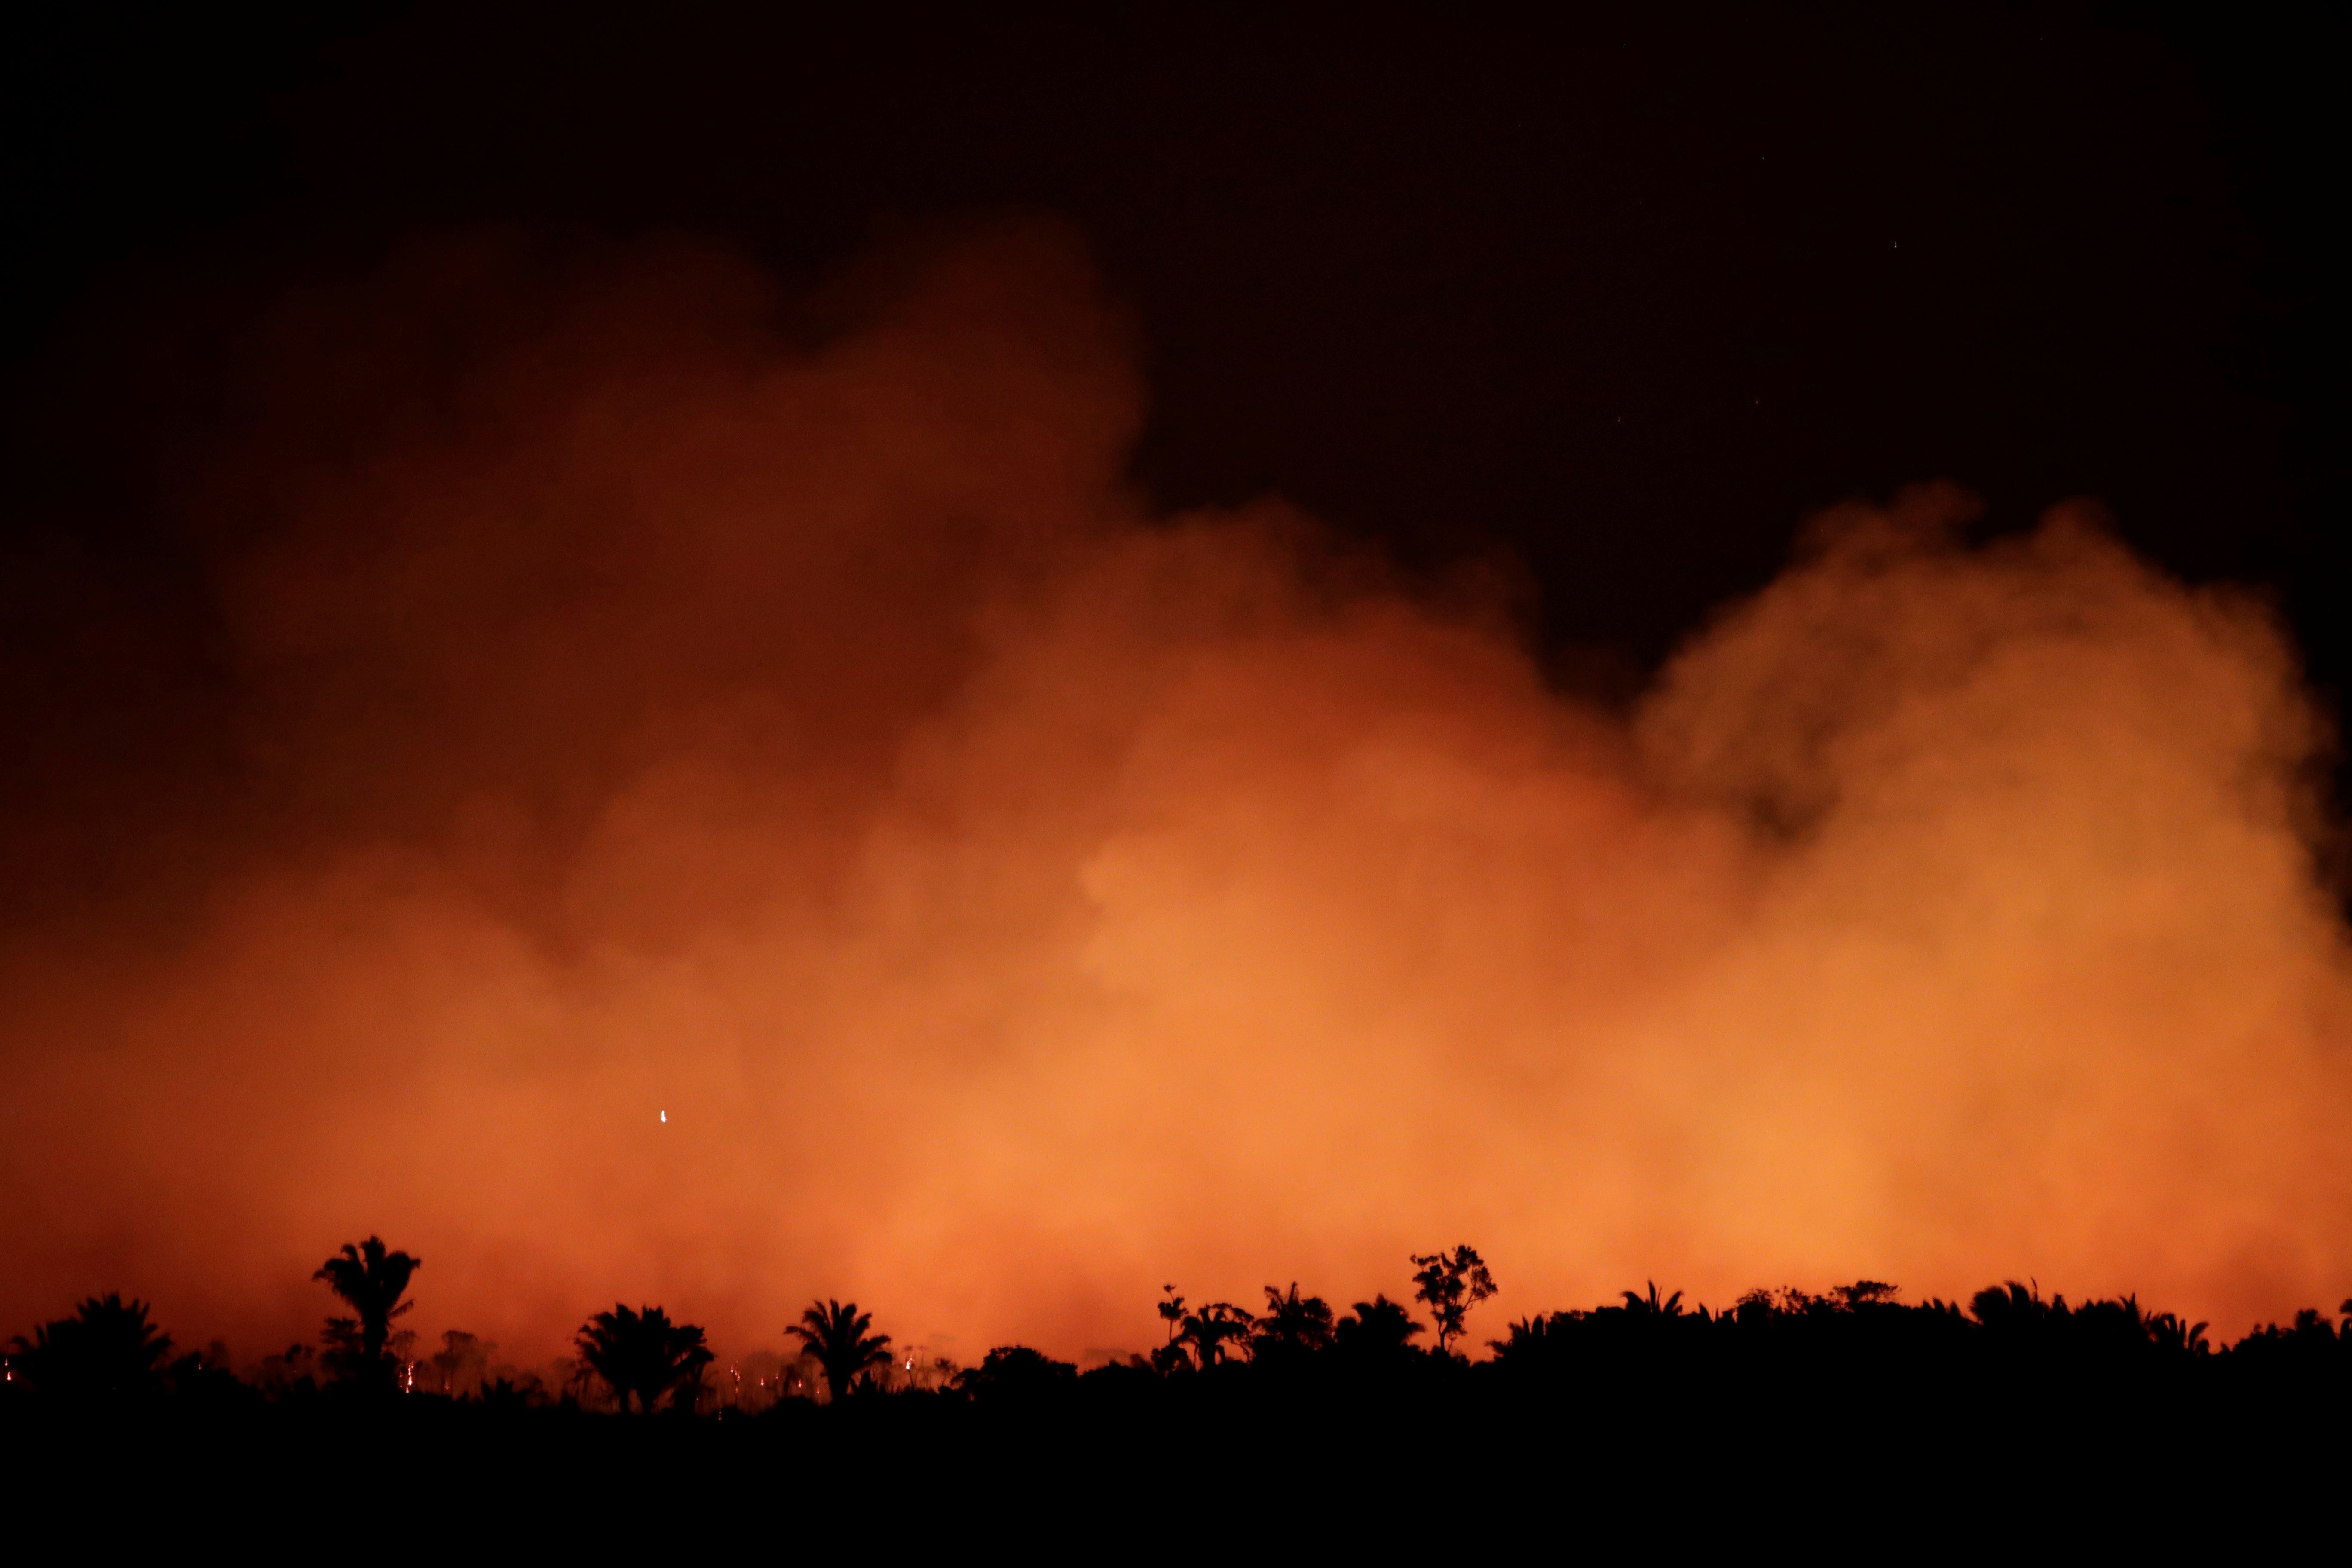 Smoke billows during a fire in an area of the Amazon rainforest.